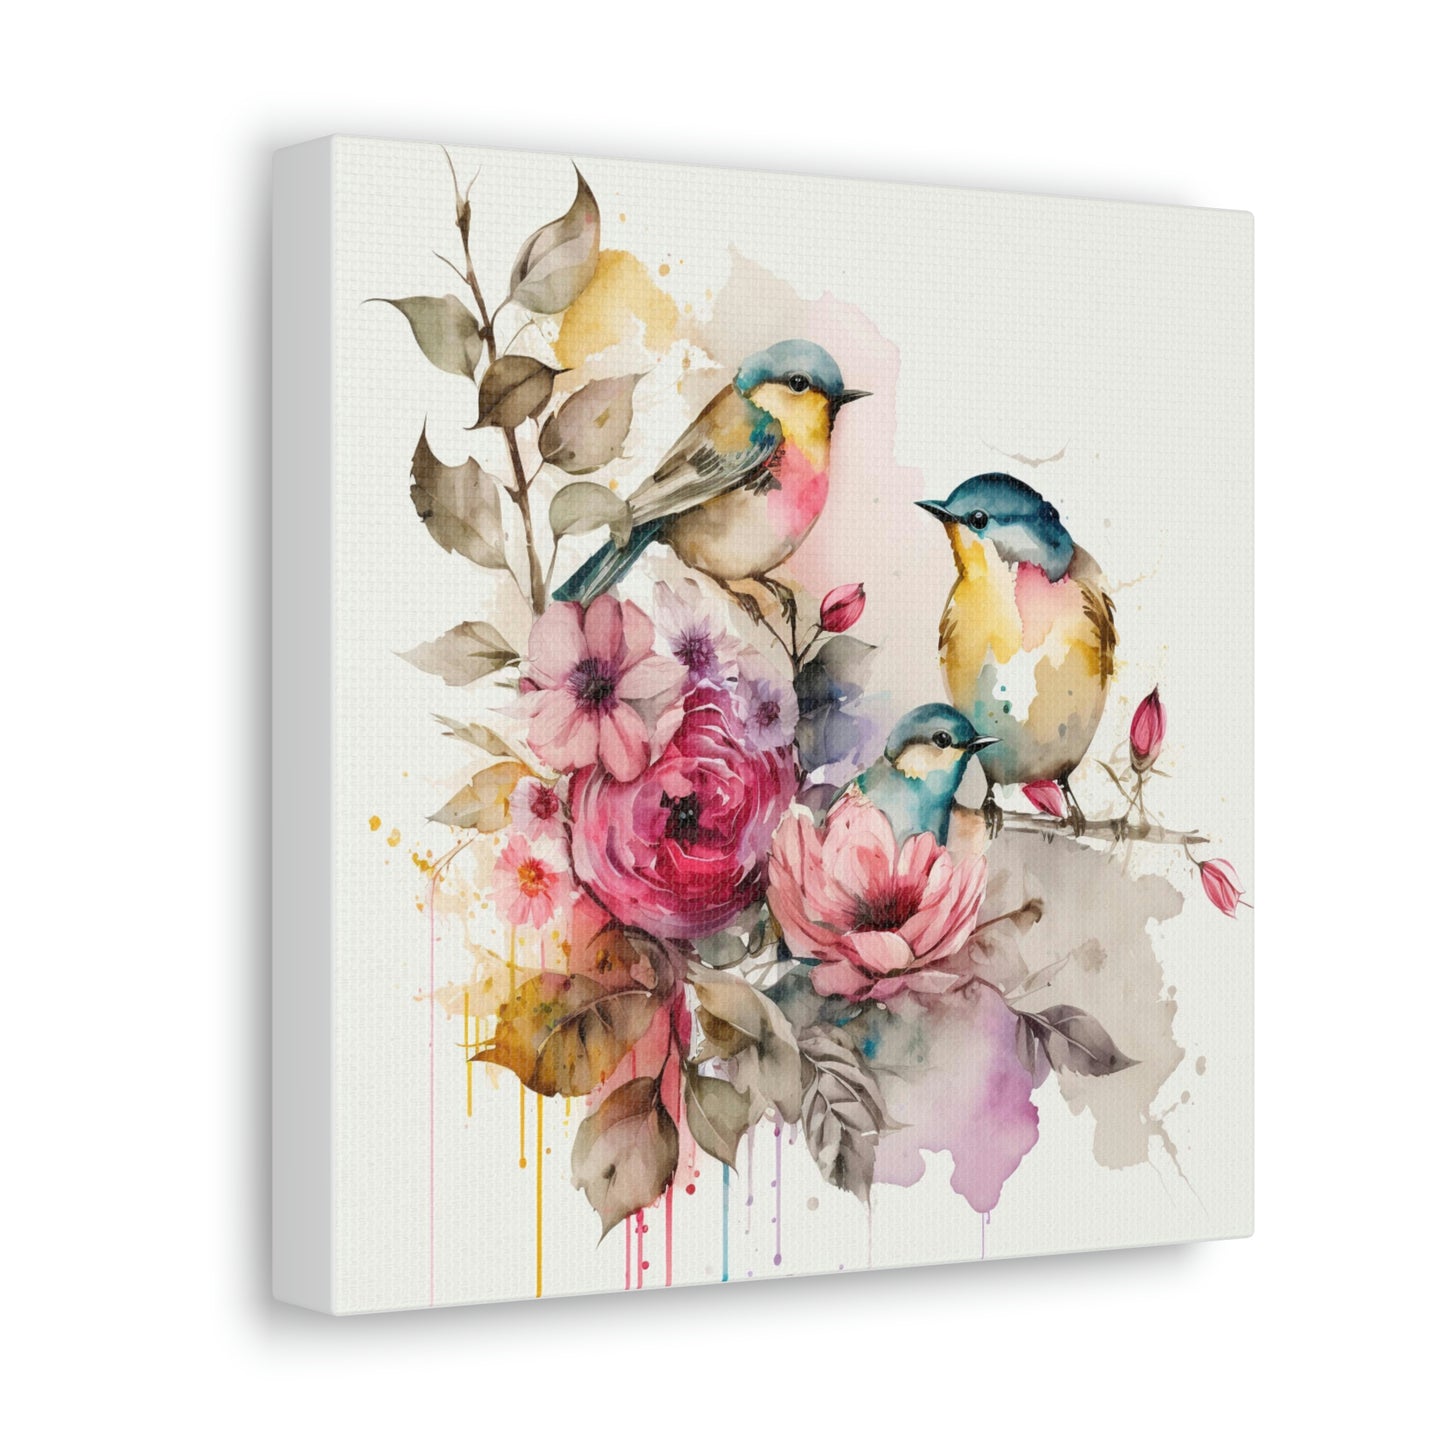 floral bird canvas wall art print, canvas with watercolor birds and flowers on it